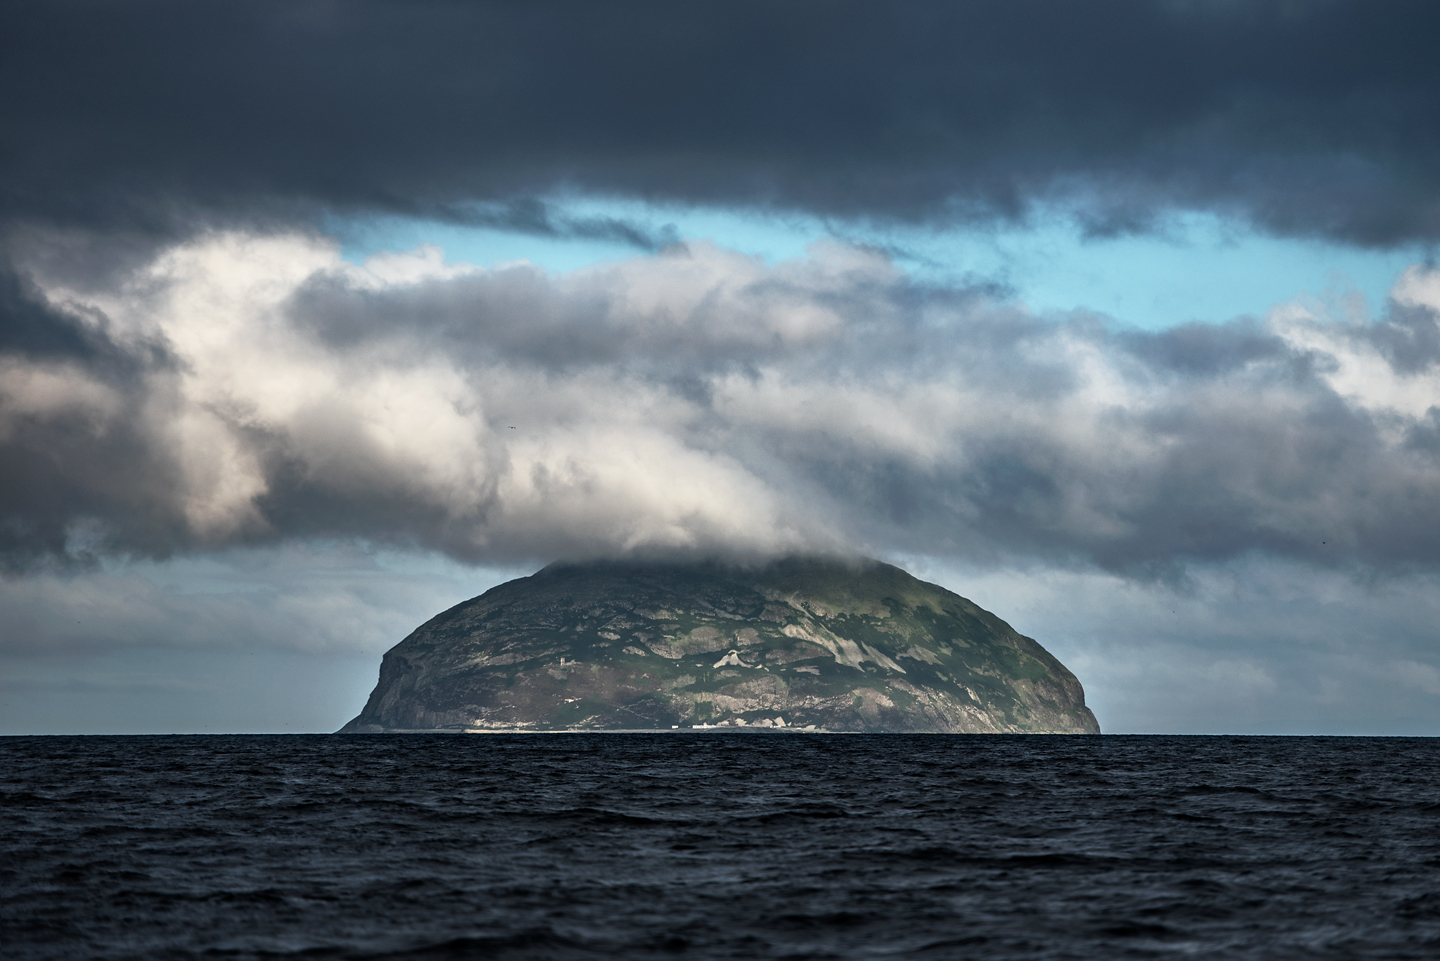  Ailsa Craig in the Firth of Clyde is another study site with 36 000 breeding pairs of gannets. This granite rock is formed from the volcanic plug of an extinct volcano 